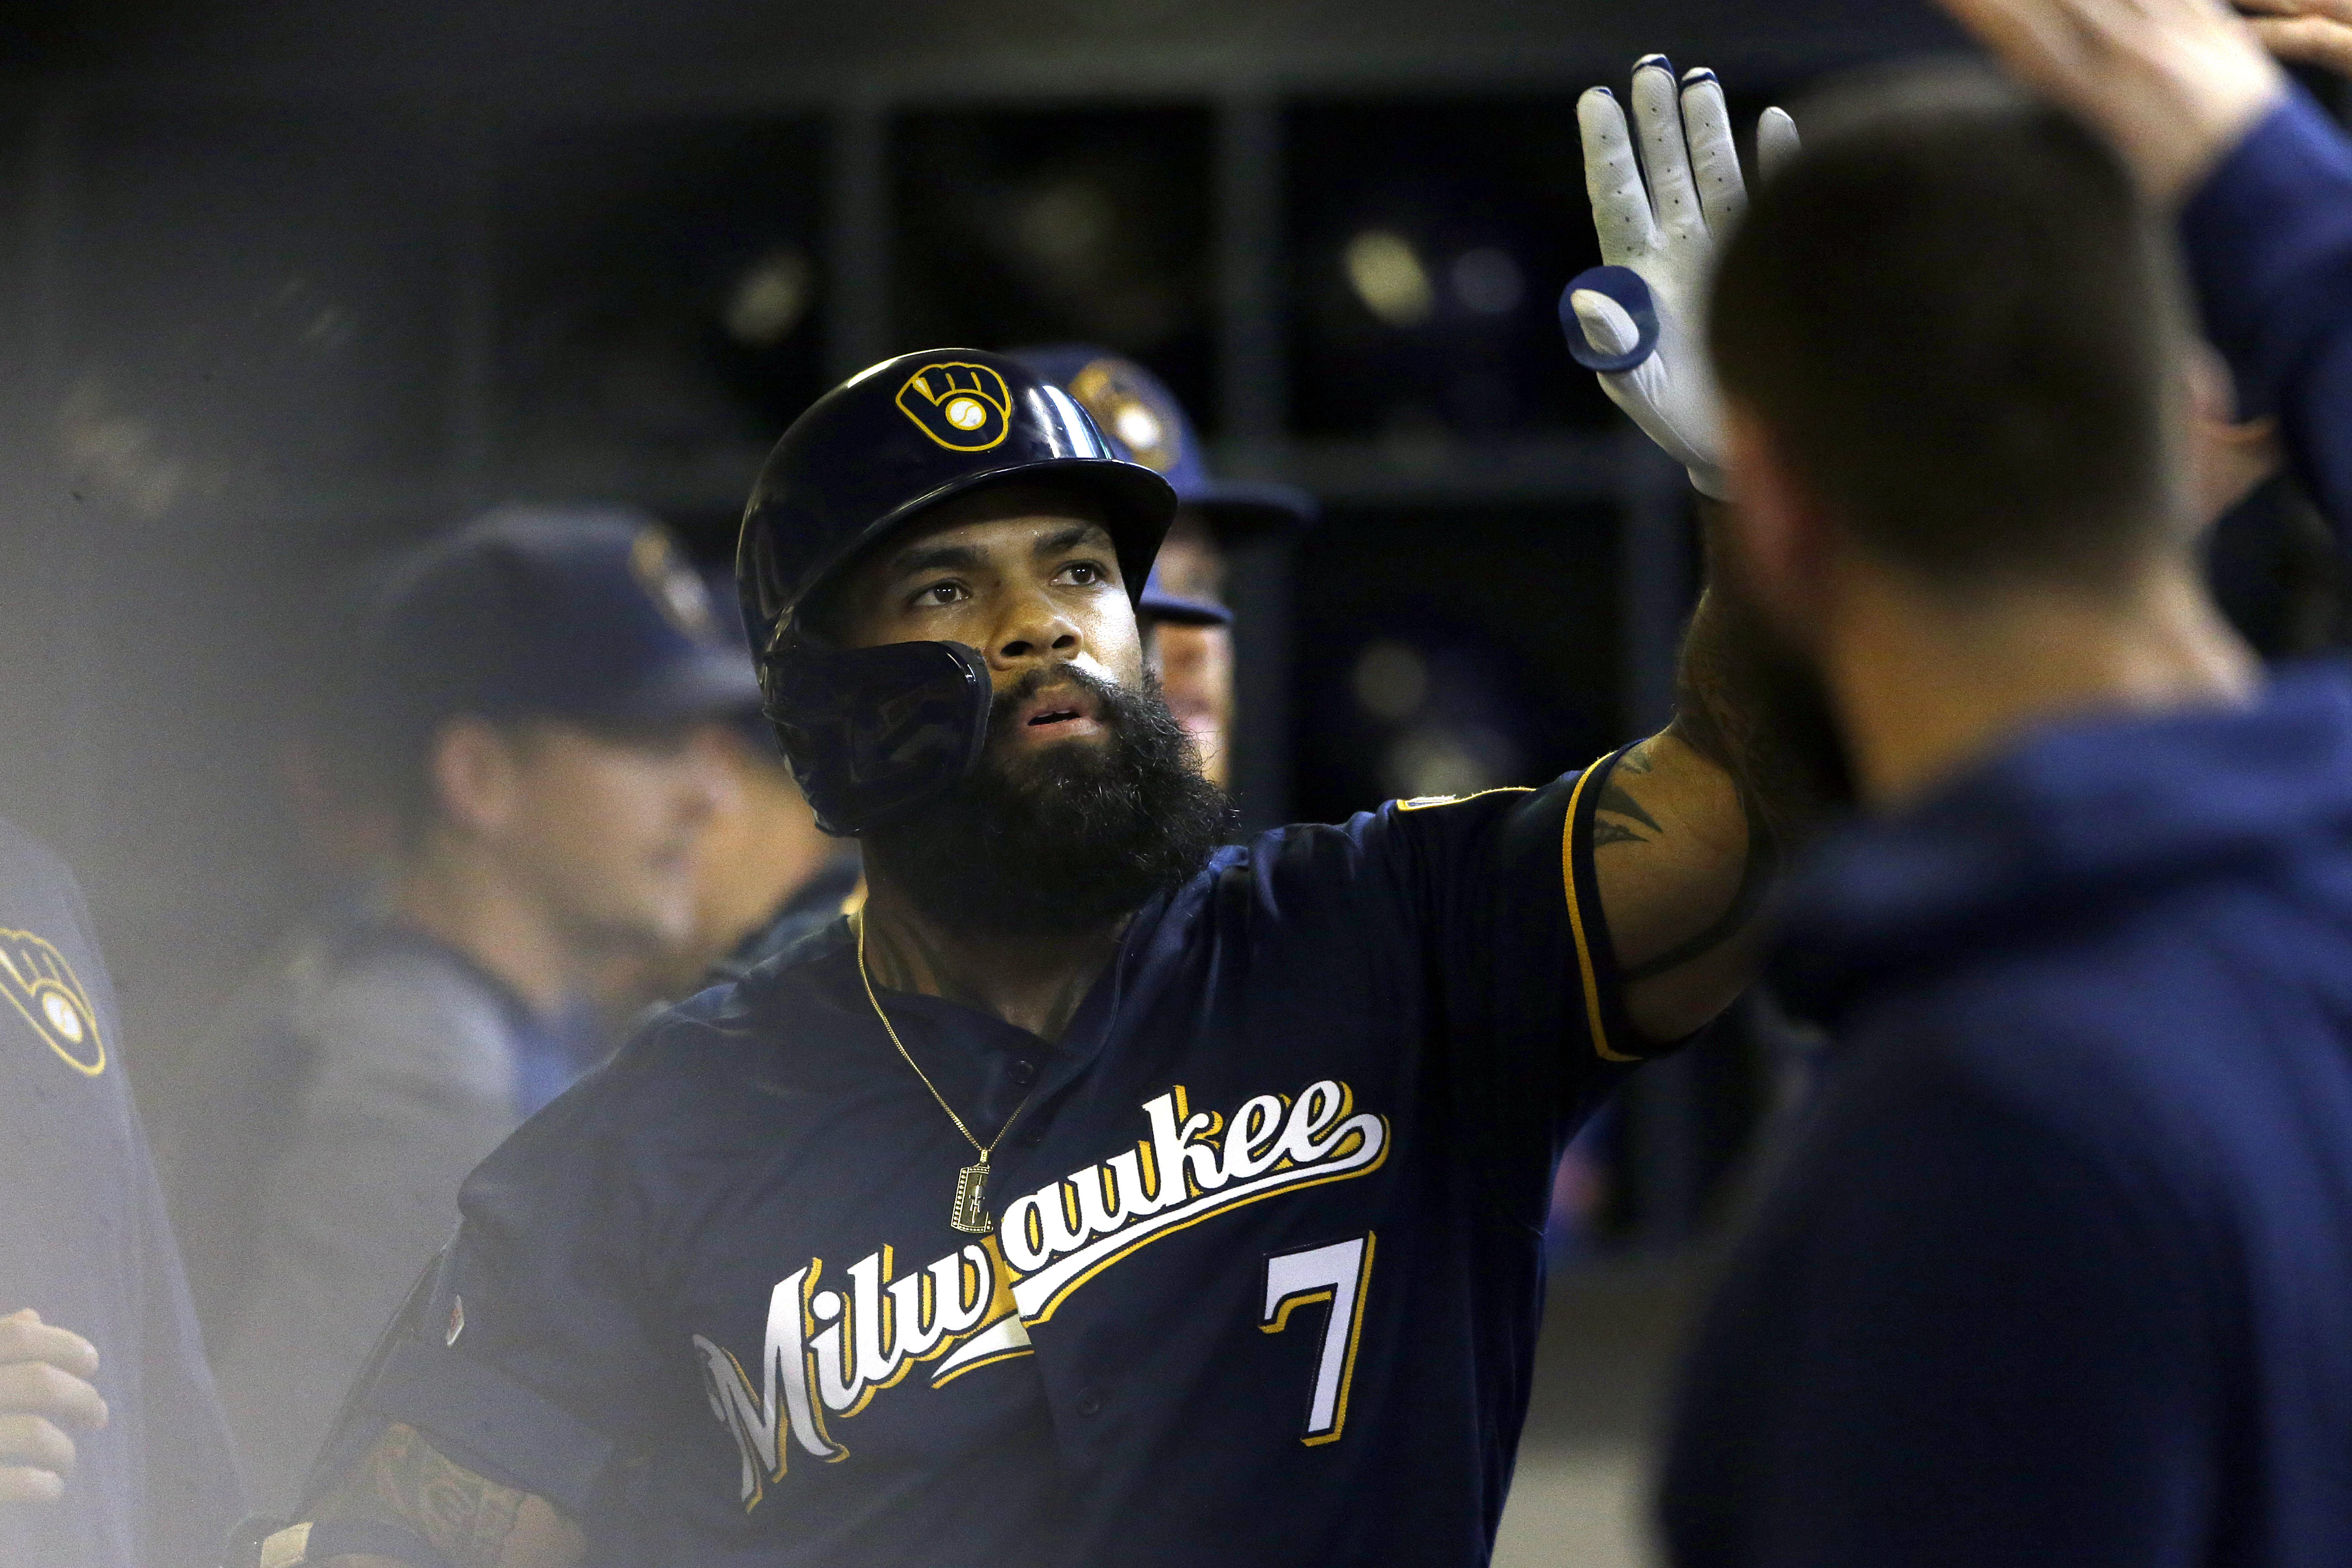 Eric Thames homers again, Reds lose to Brewers